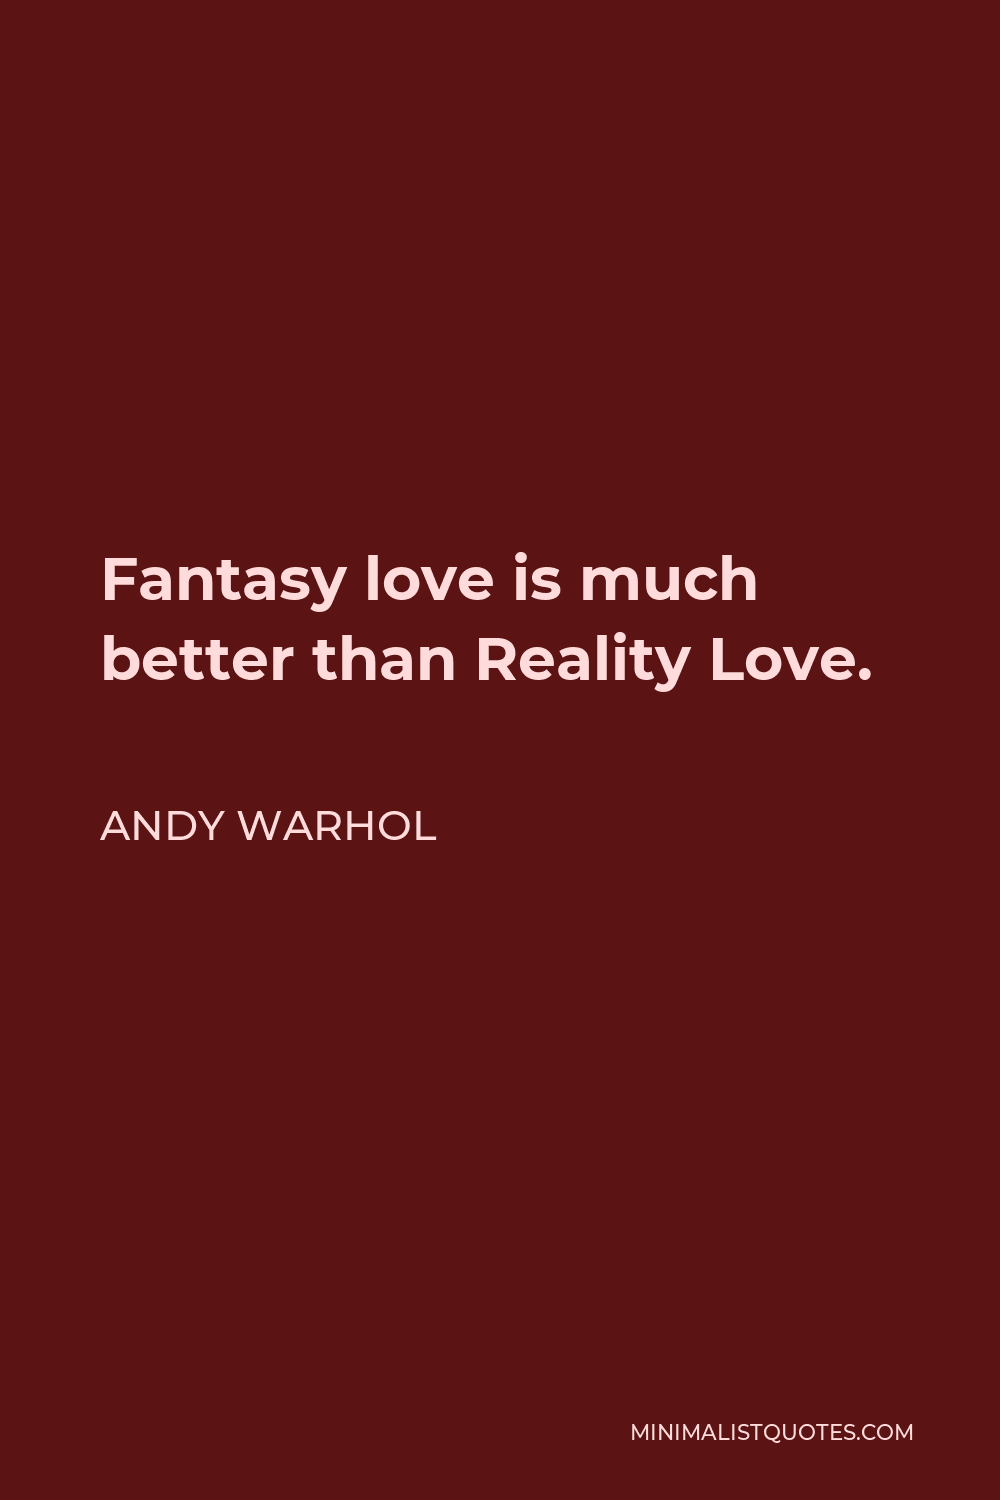 Andy Warhol Quote - Fantasy love is much better than Reality Love.